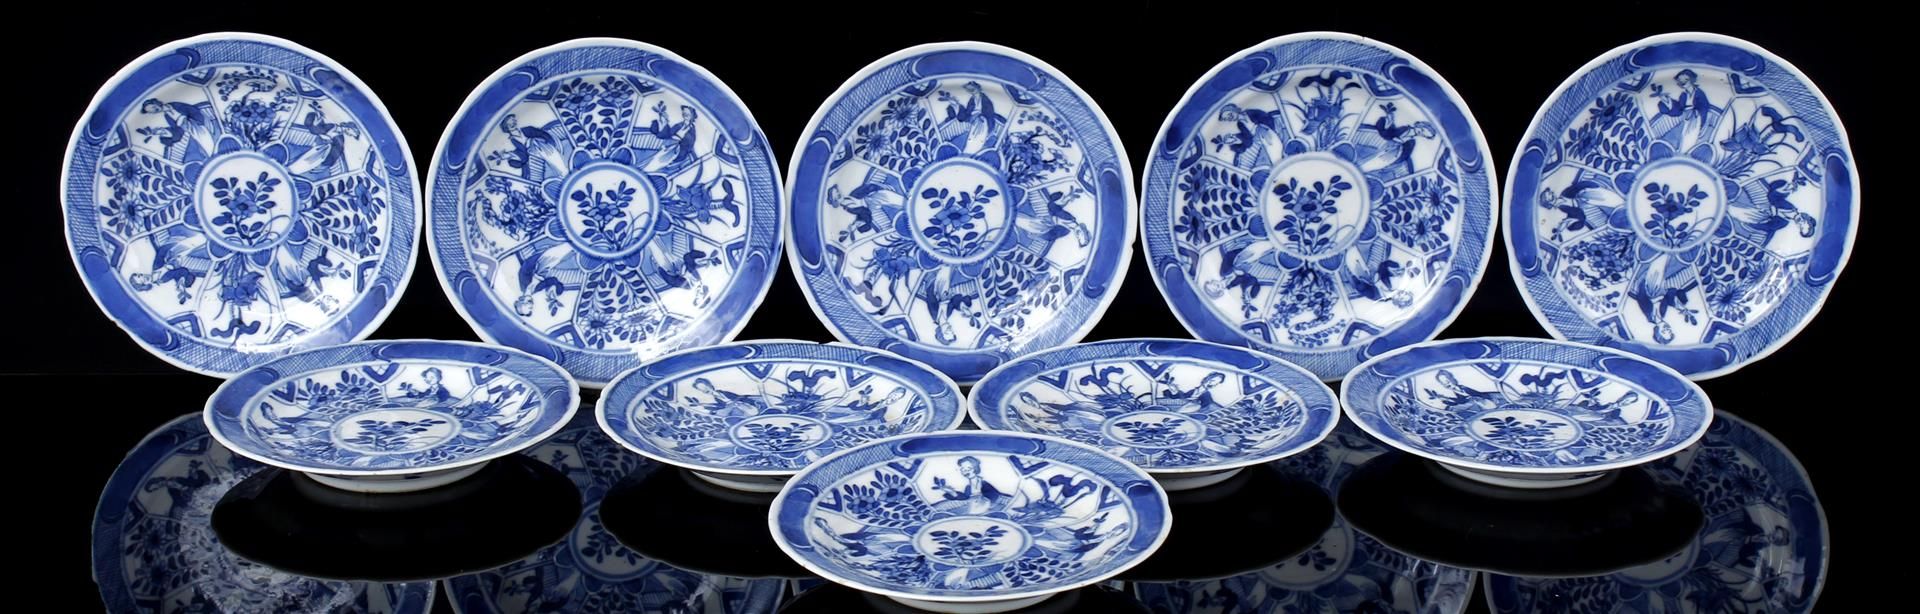 10 porcelain dishes, 19th